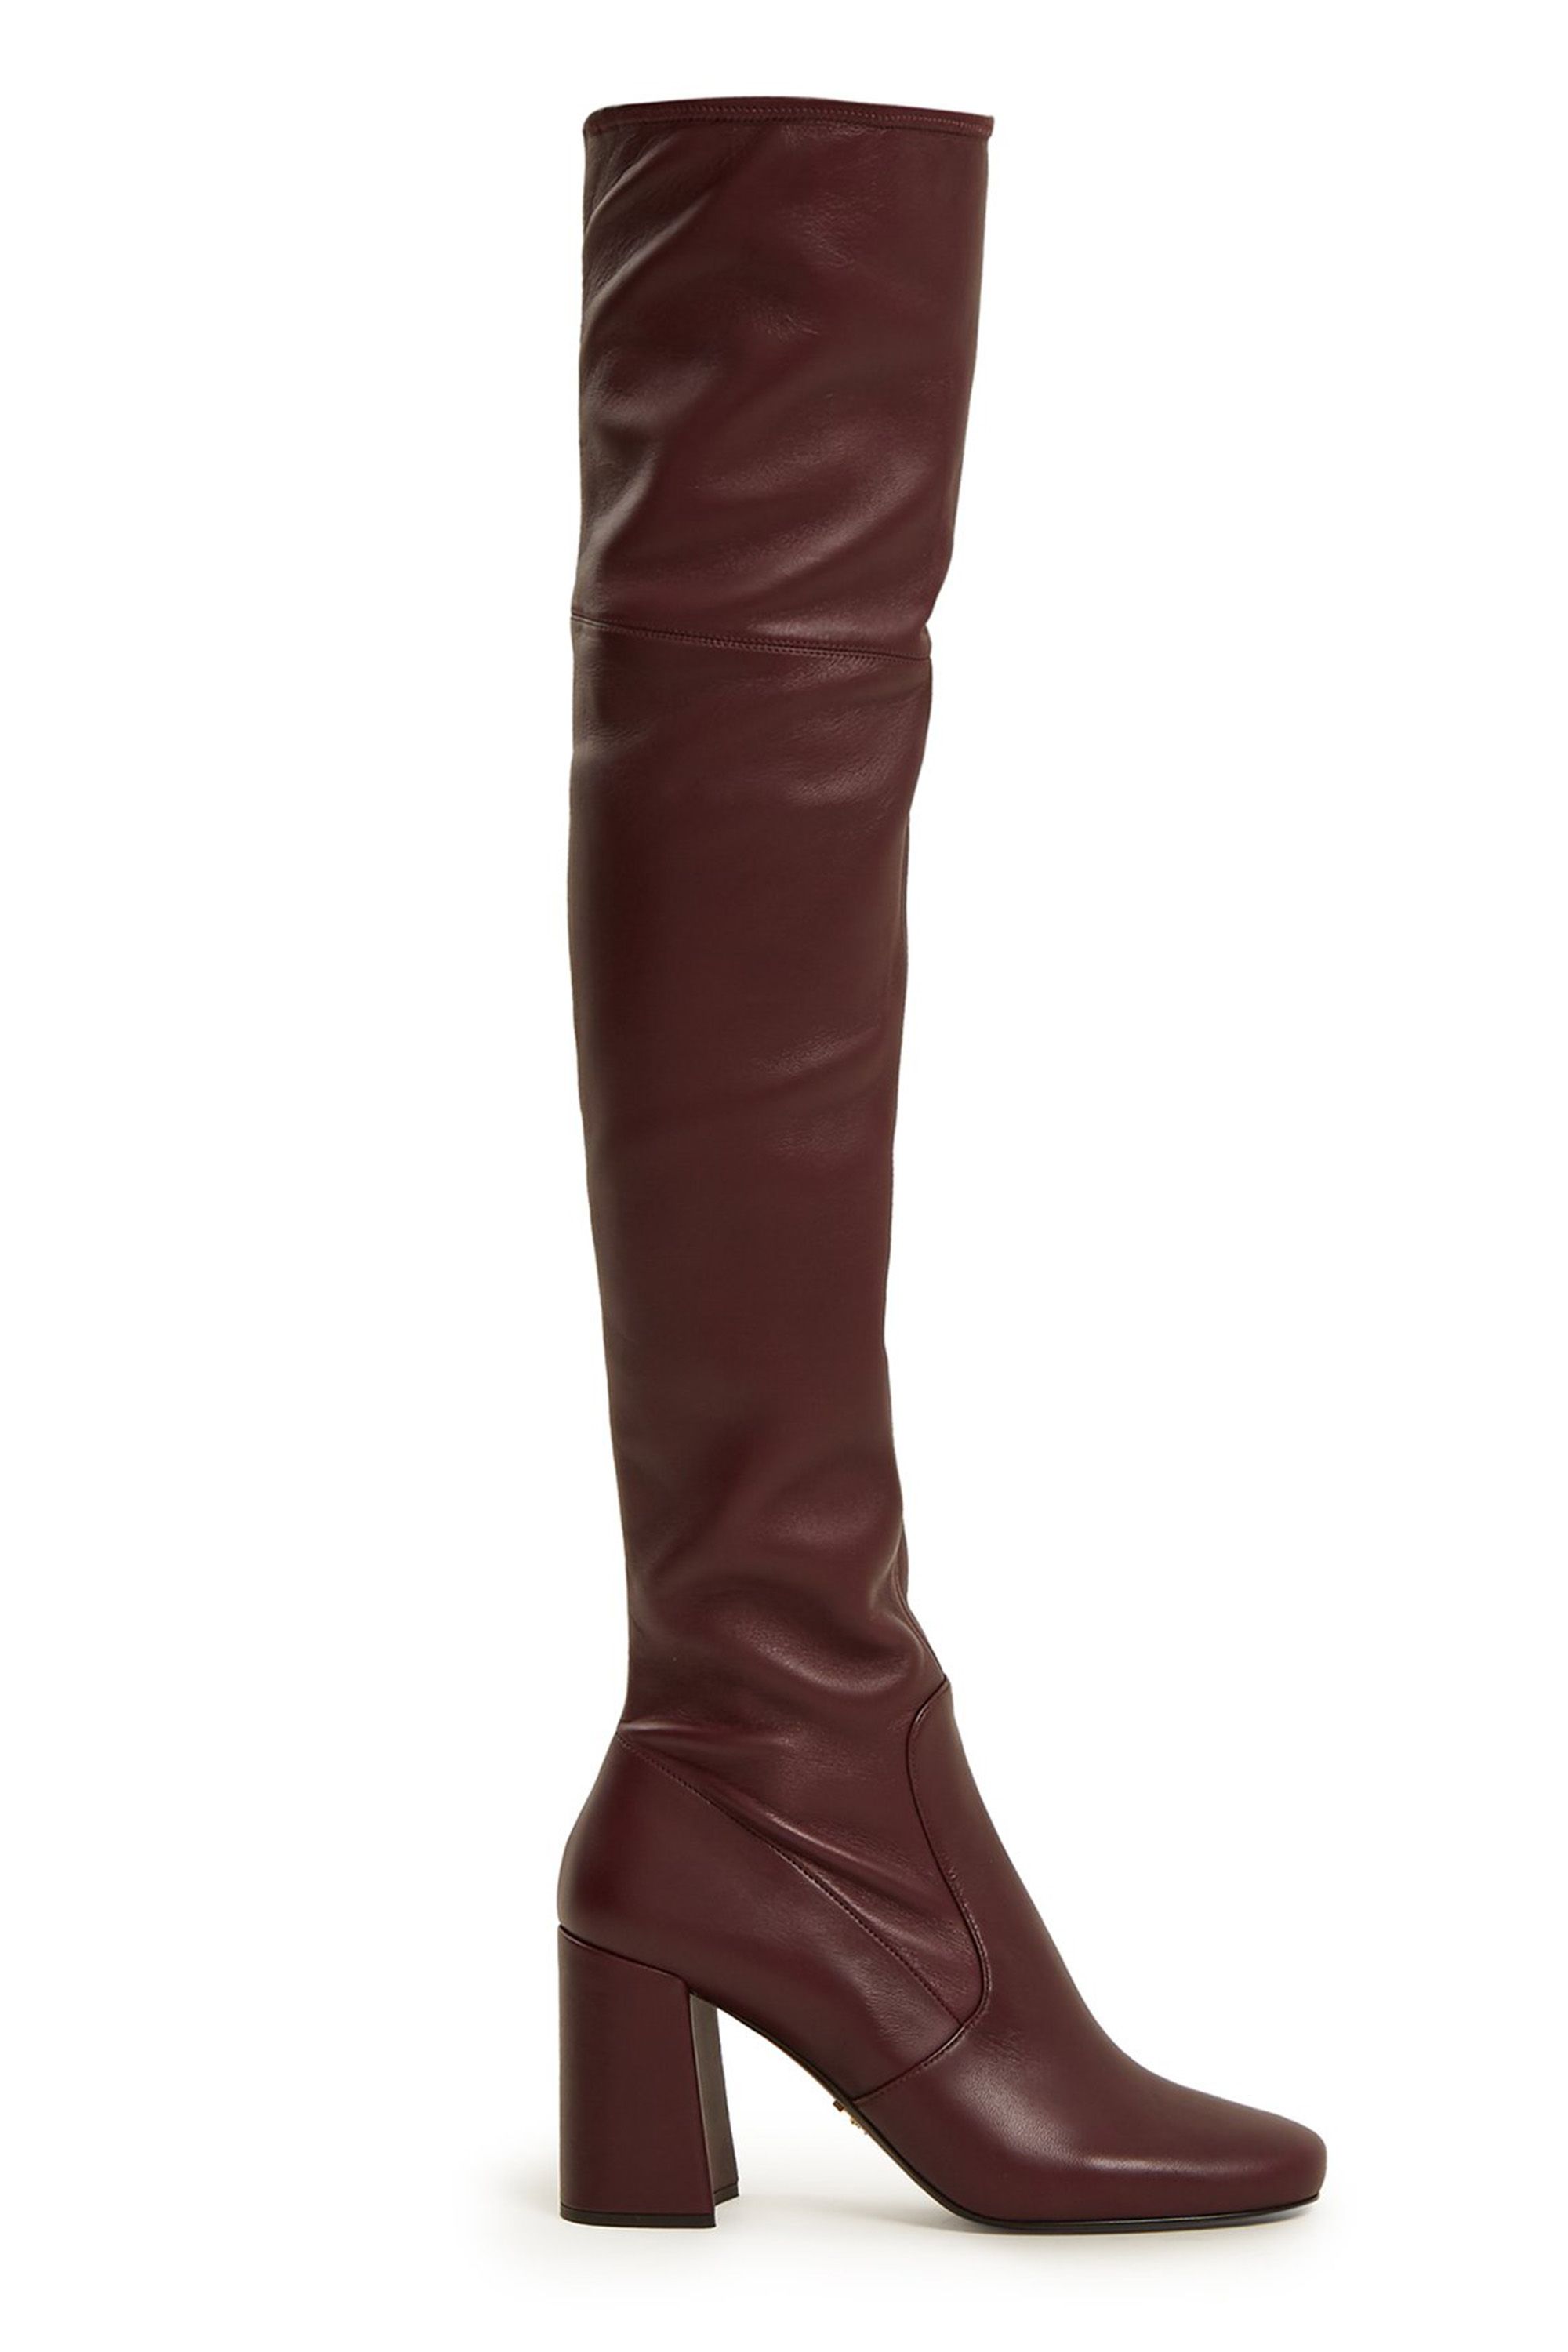 are thigh high boots still in style 219